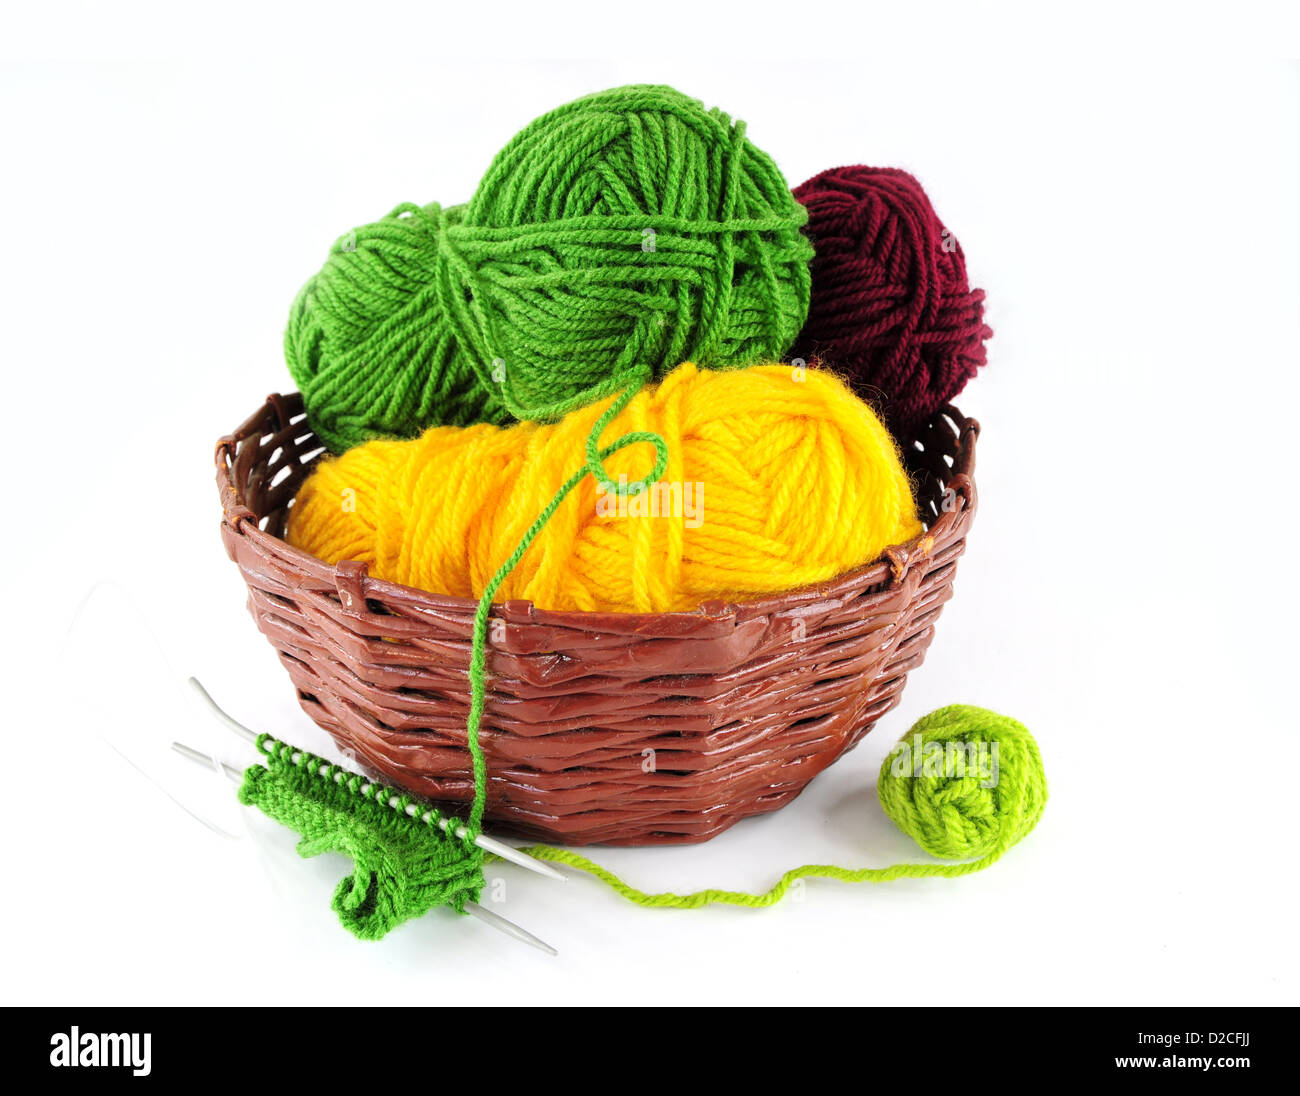 Colorful yarn and needles for knitting in wicker basket Stock Photo